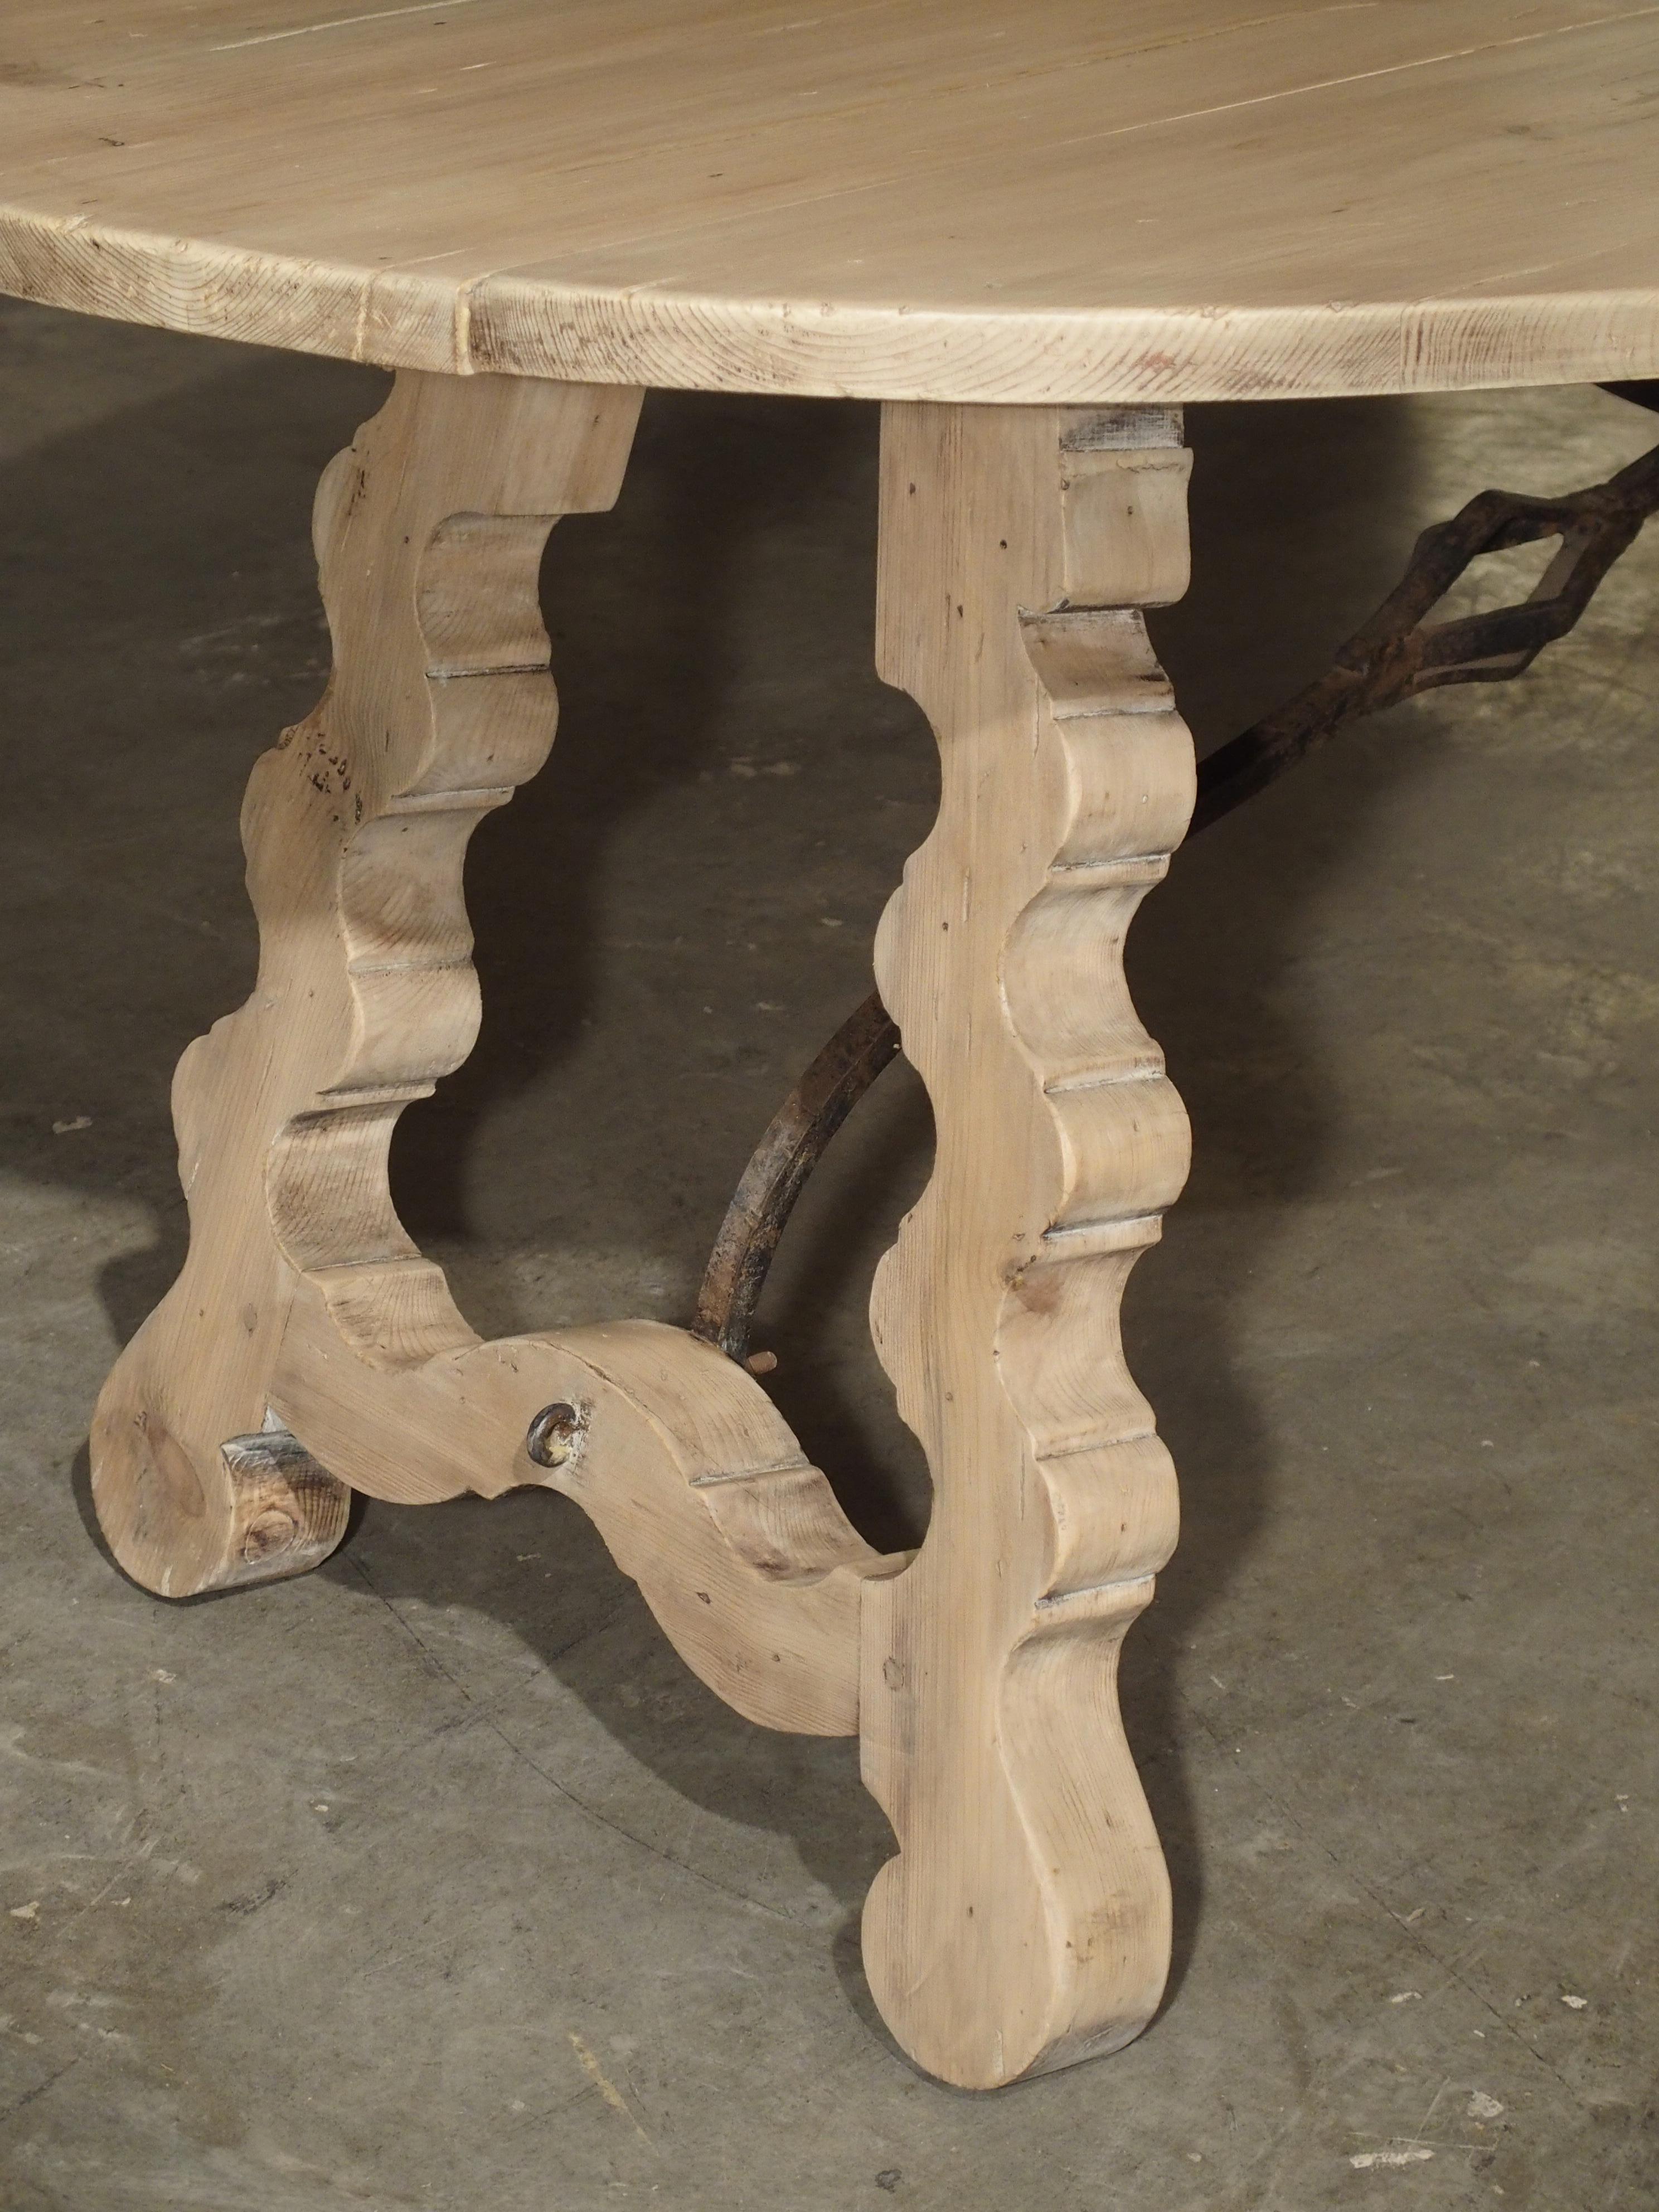 Carved Early 1900s Oval Spanish Drop-Leaf Table with Iron Hardware